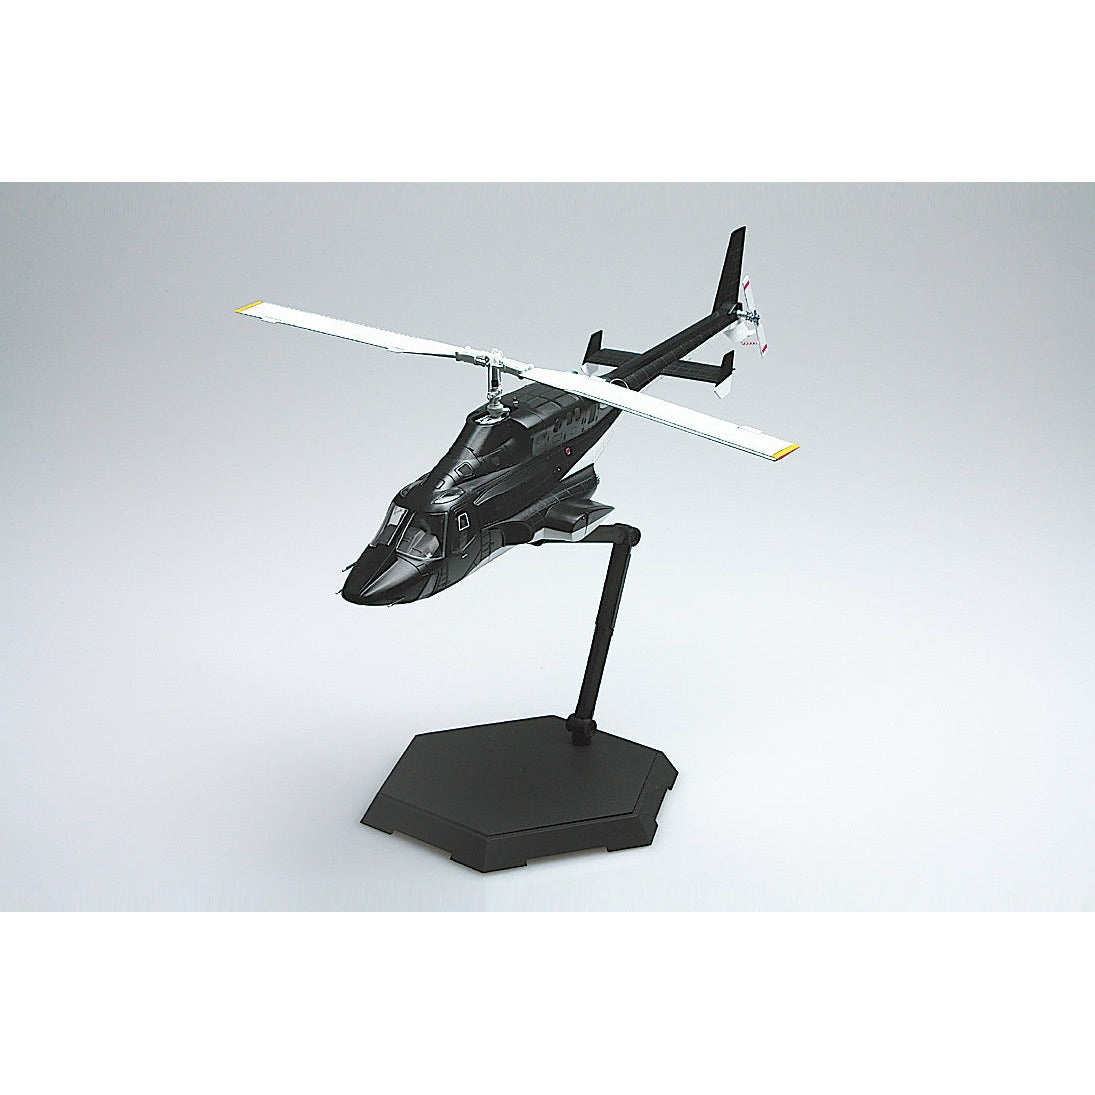 Airwolf Clear Body Ver. 1/48 #6352 by Aoshima